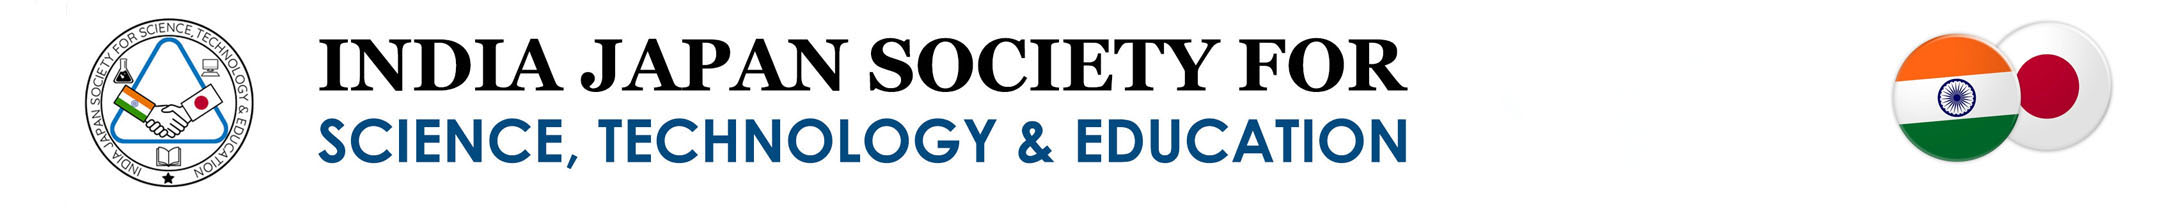 India Japan Society For Science,Technology & Education